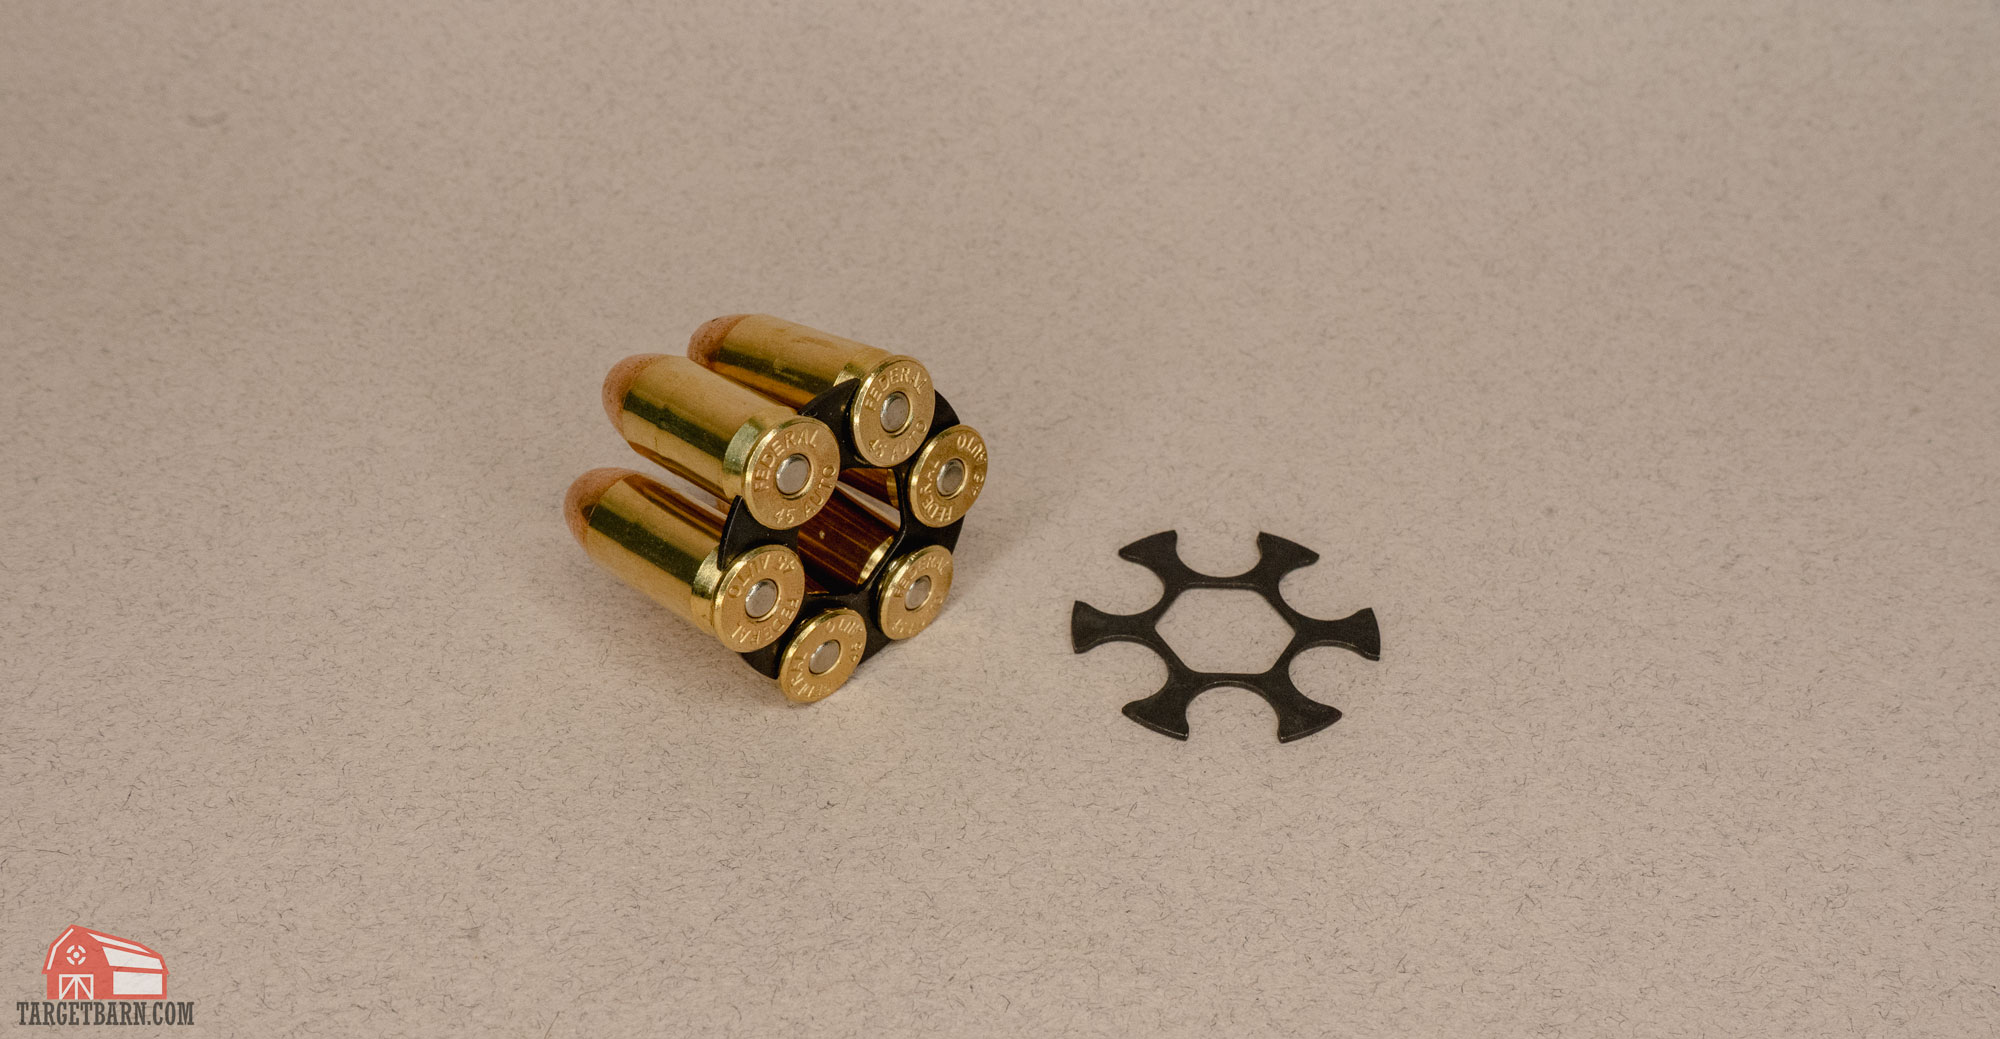 a moon clip loaded with .45 acp rounds next to an empty moon clip